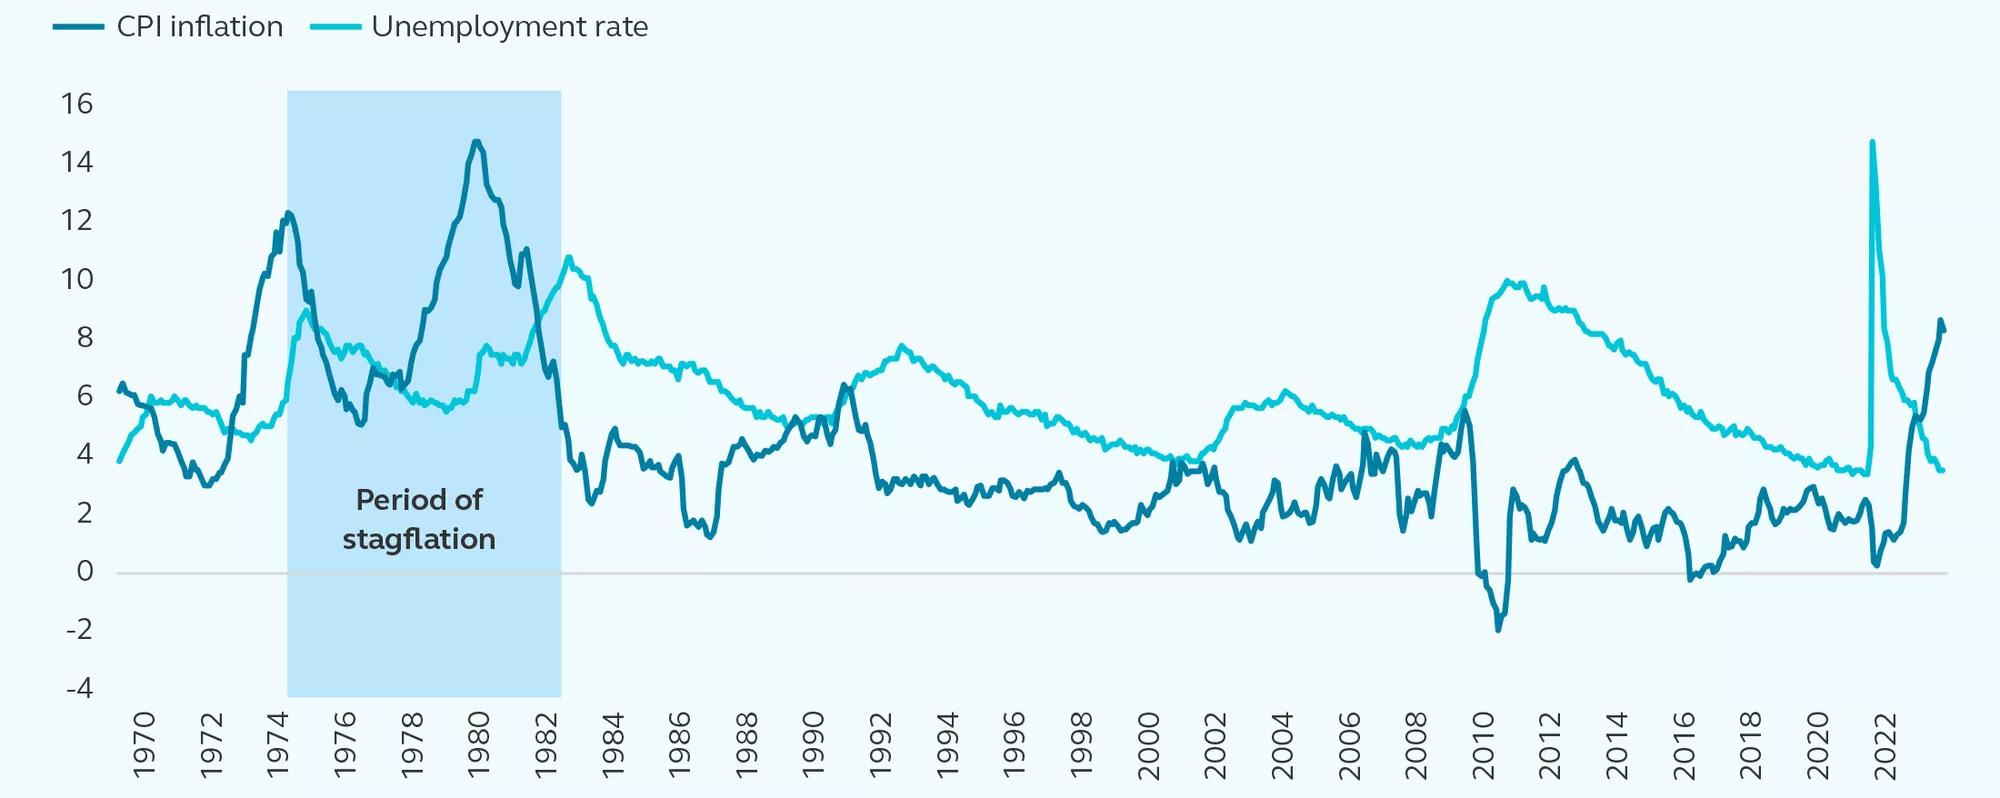 Line chart comparing CPI inflation and unemployment rate from 1970-2022